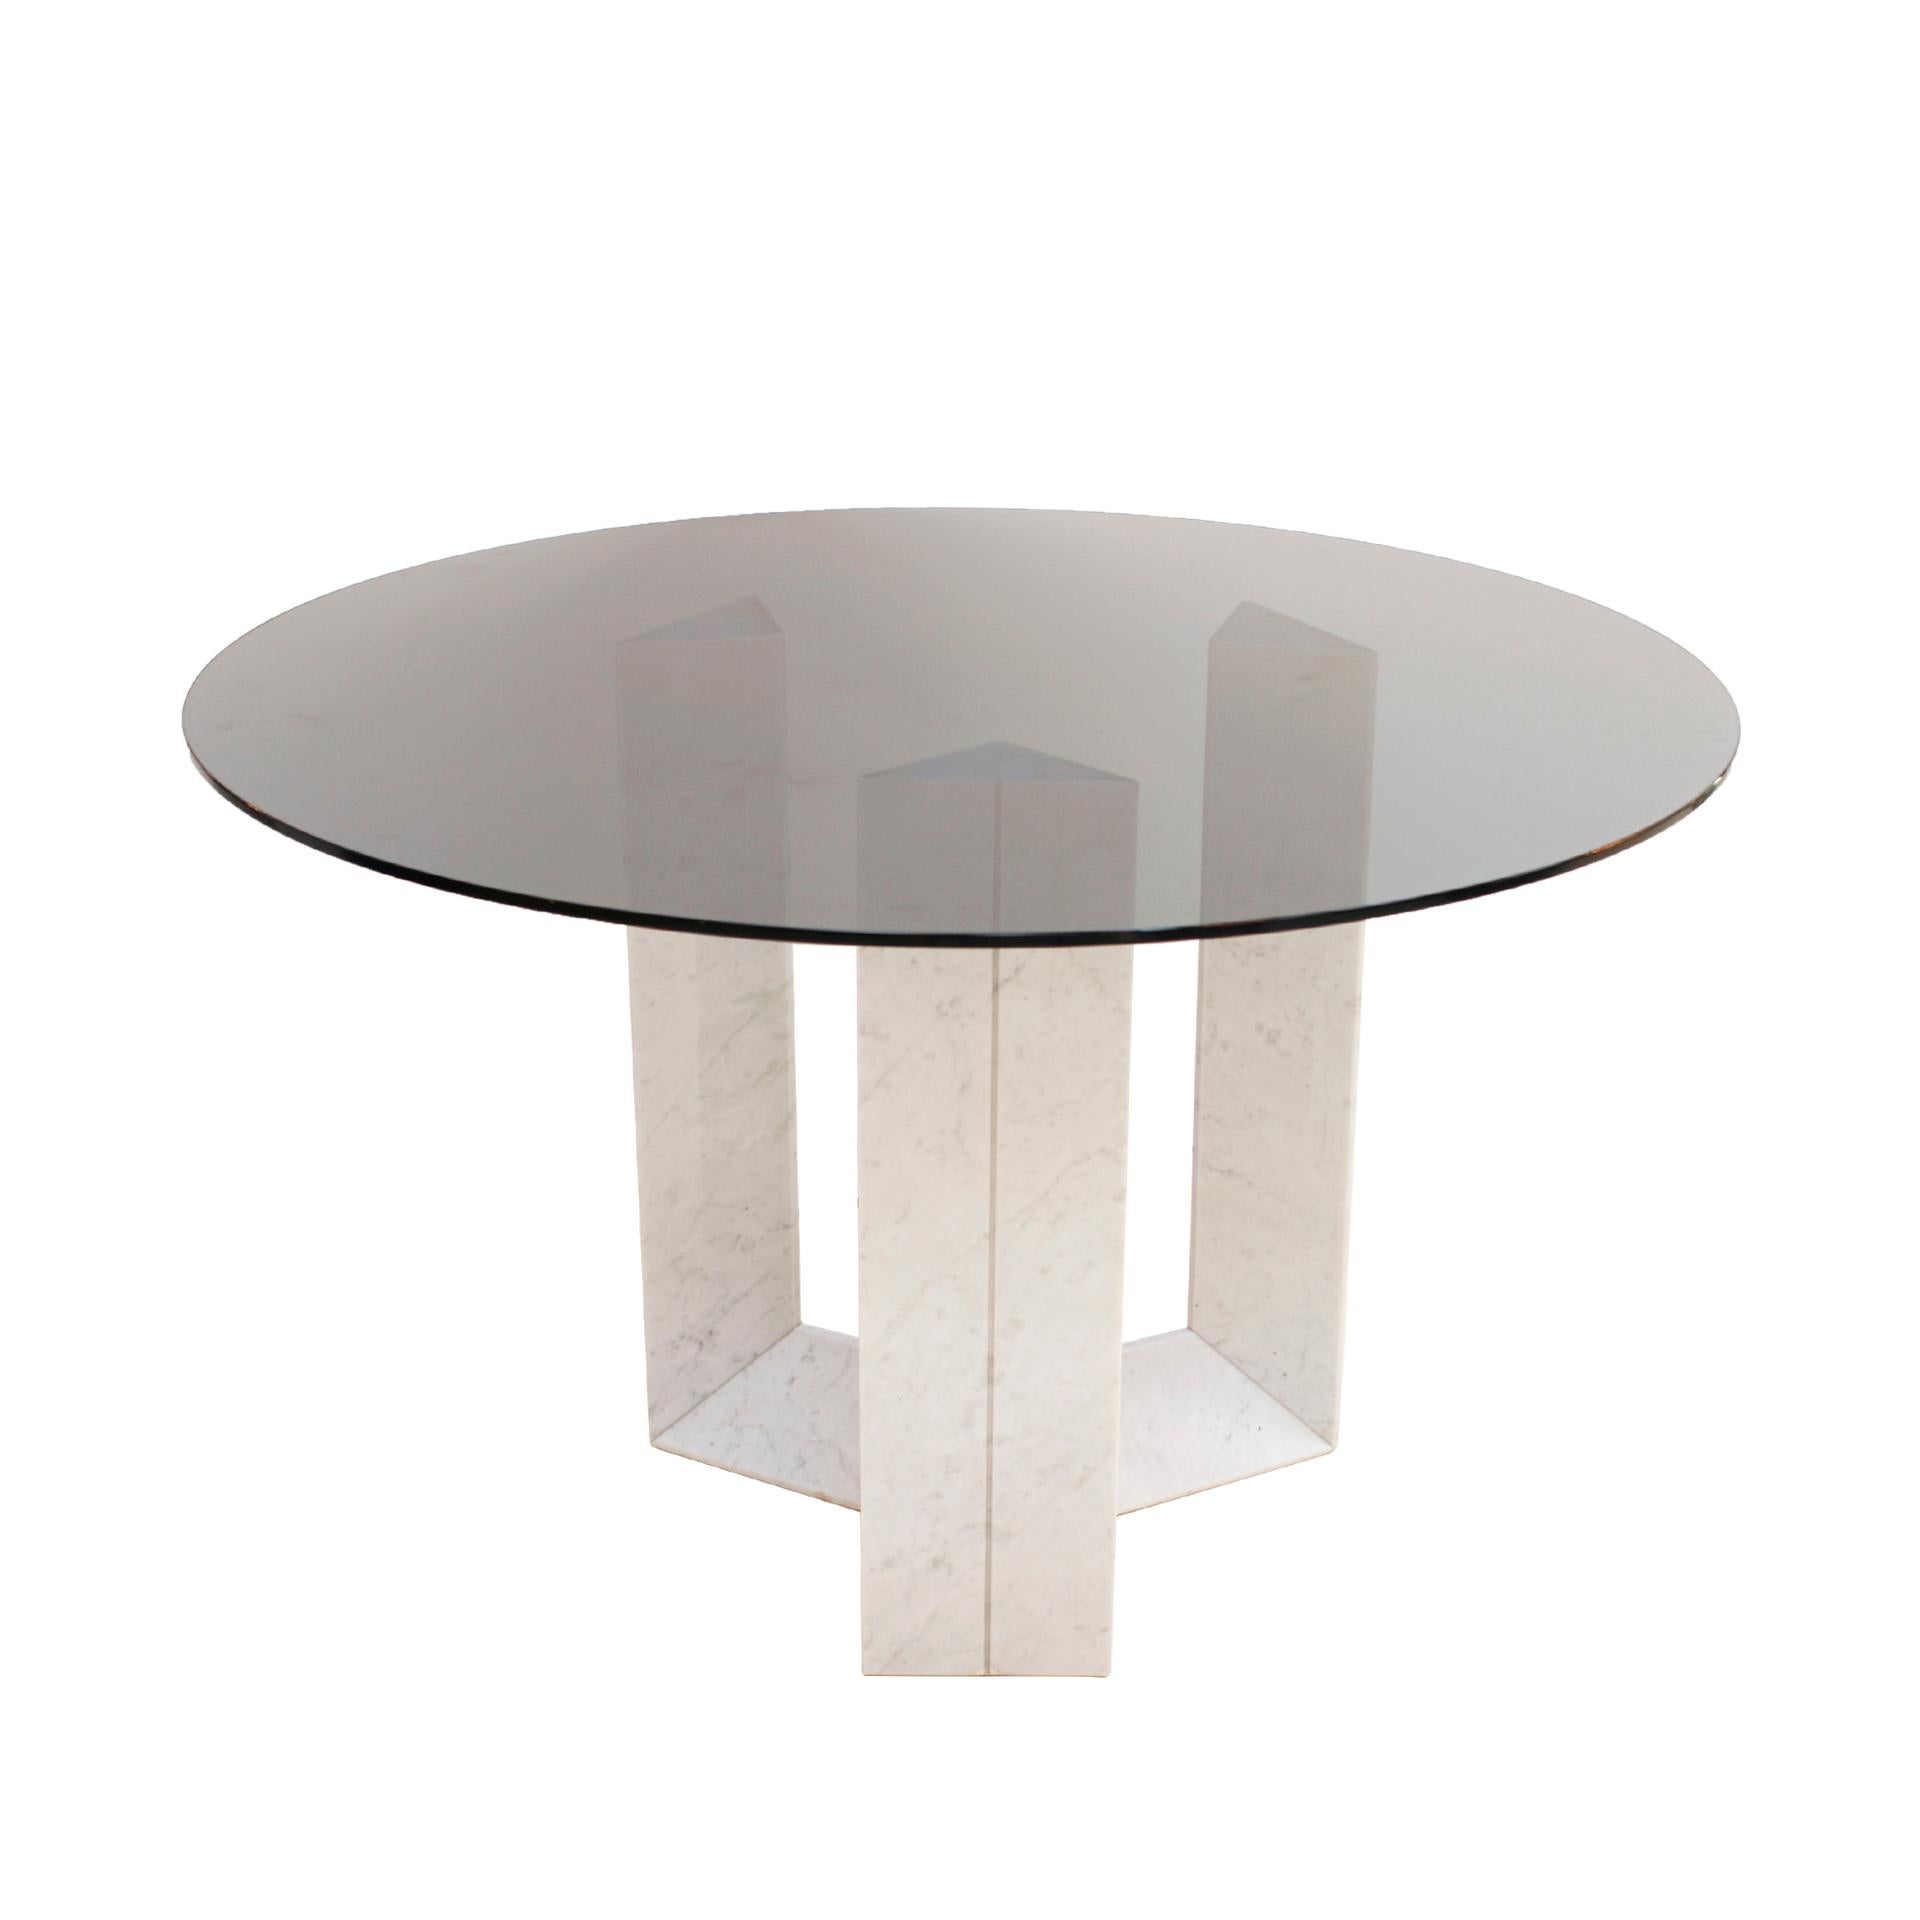 Italian table designed by Cattelan. Structure made of Carrara marble and glass top.

Our main target is customer satisfaction, so we include in the price for this item professional and custom made packing.

Every item LA Studio offers is checked by